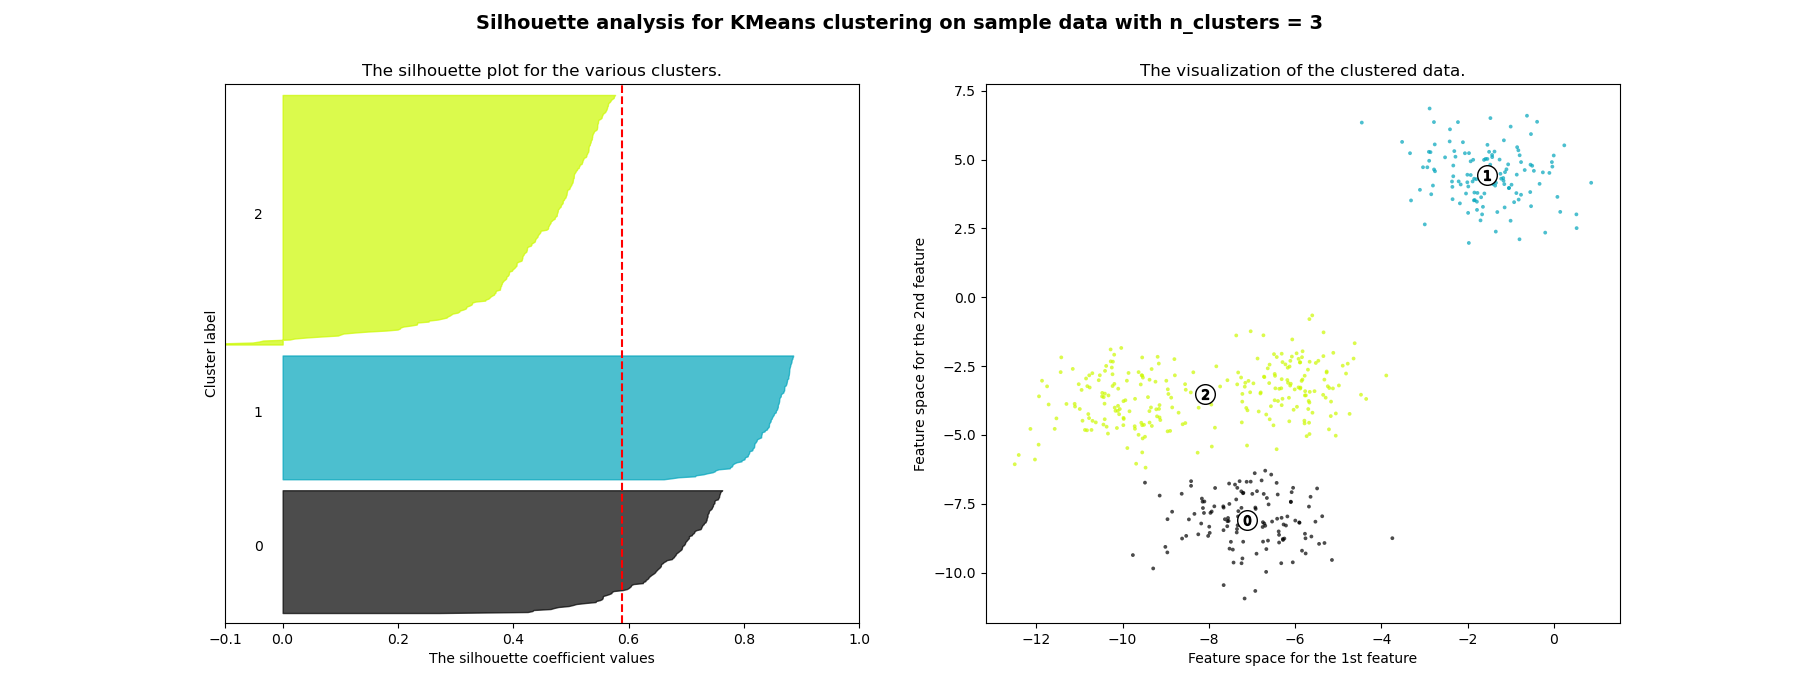 ../../_images/sphx_glr_plot_kmeans_silhouette_analysis_002.png